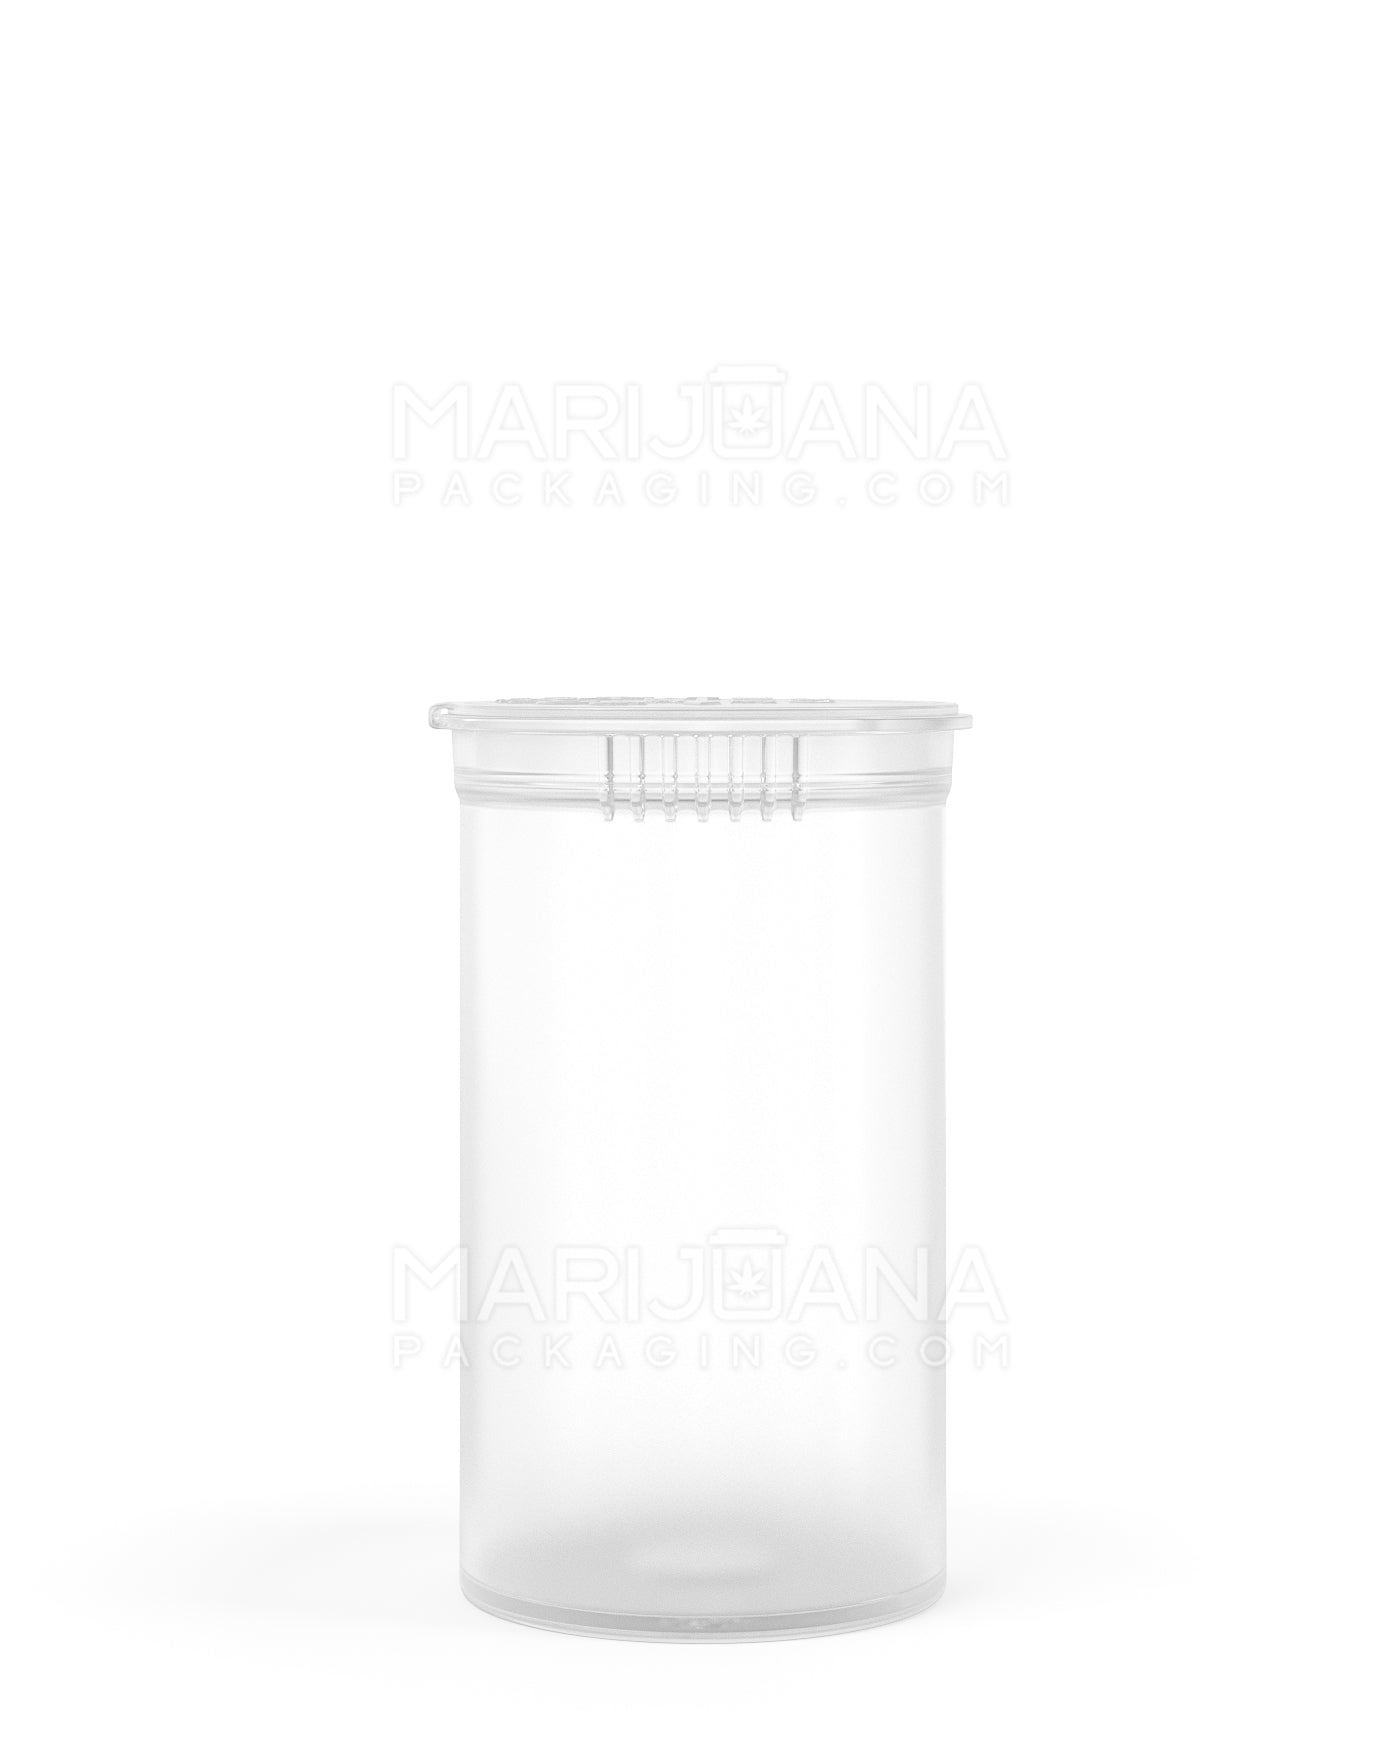 Child Resistant & Sustainable | 100% Biodegradable Clear Pop Top Bottles | 19dr - 3.5g - 225 Count - 2